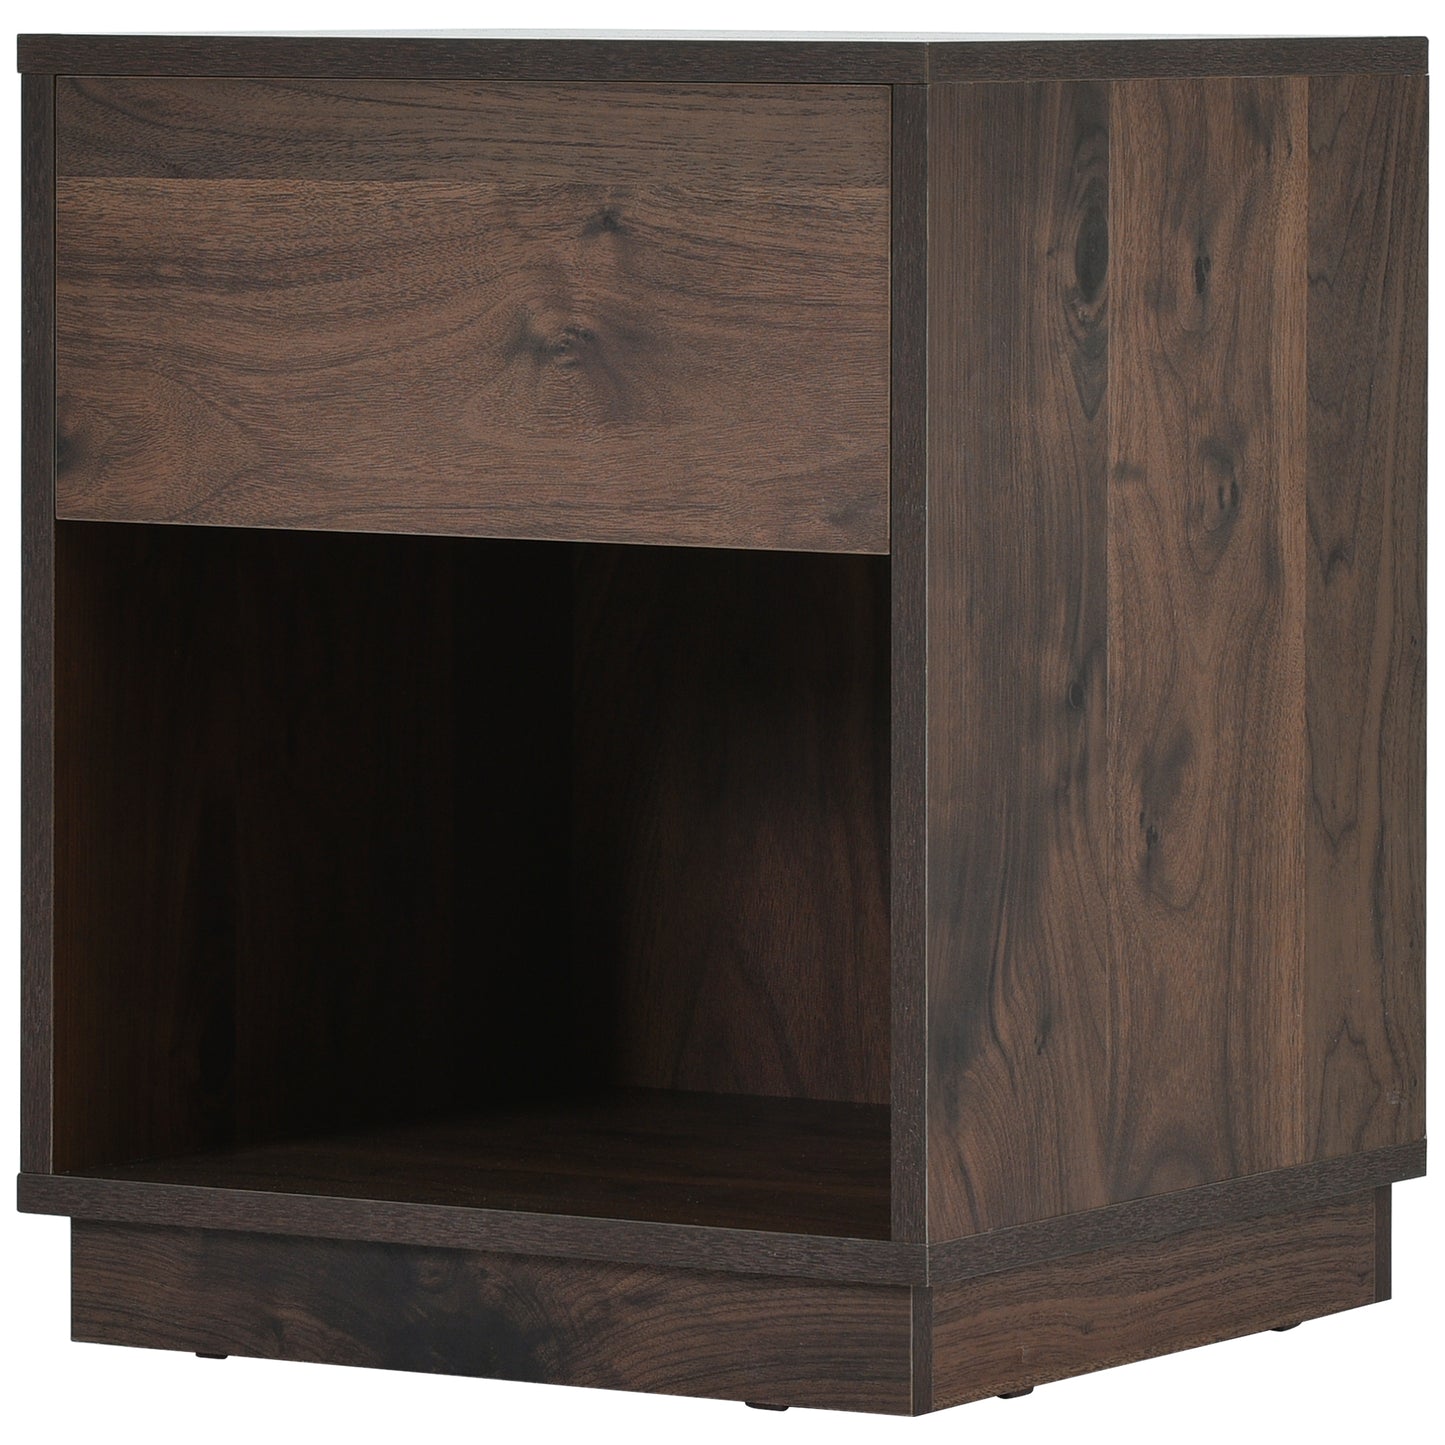 Mid-Century Modern Nightstand End Table Open Storage with One Drawer